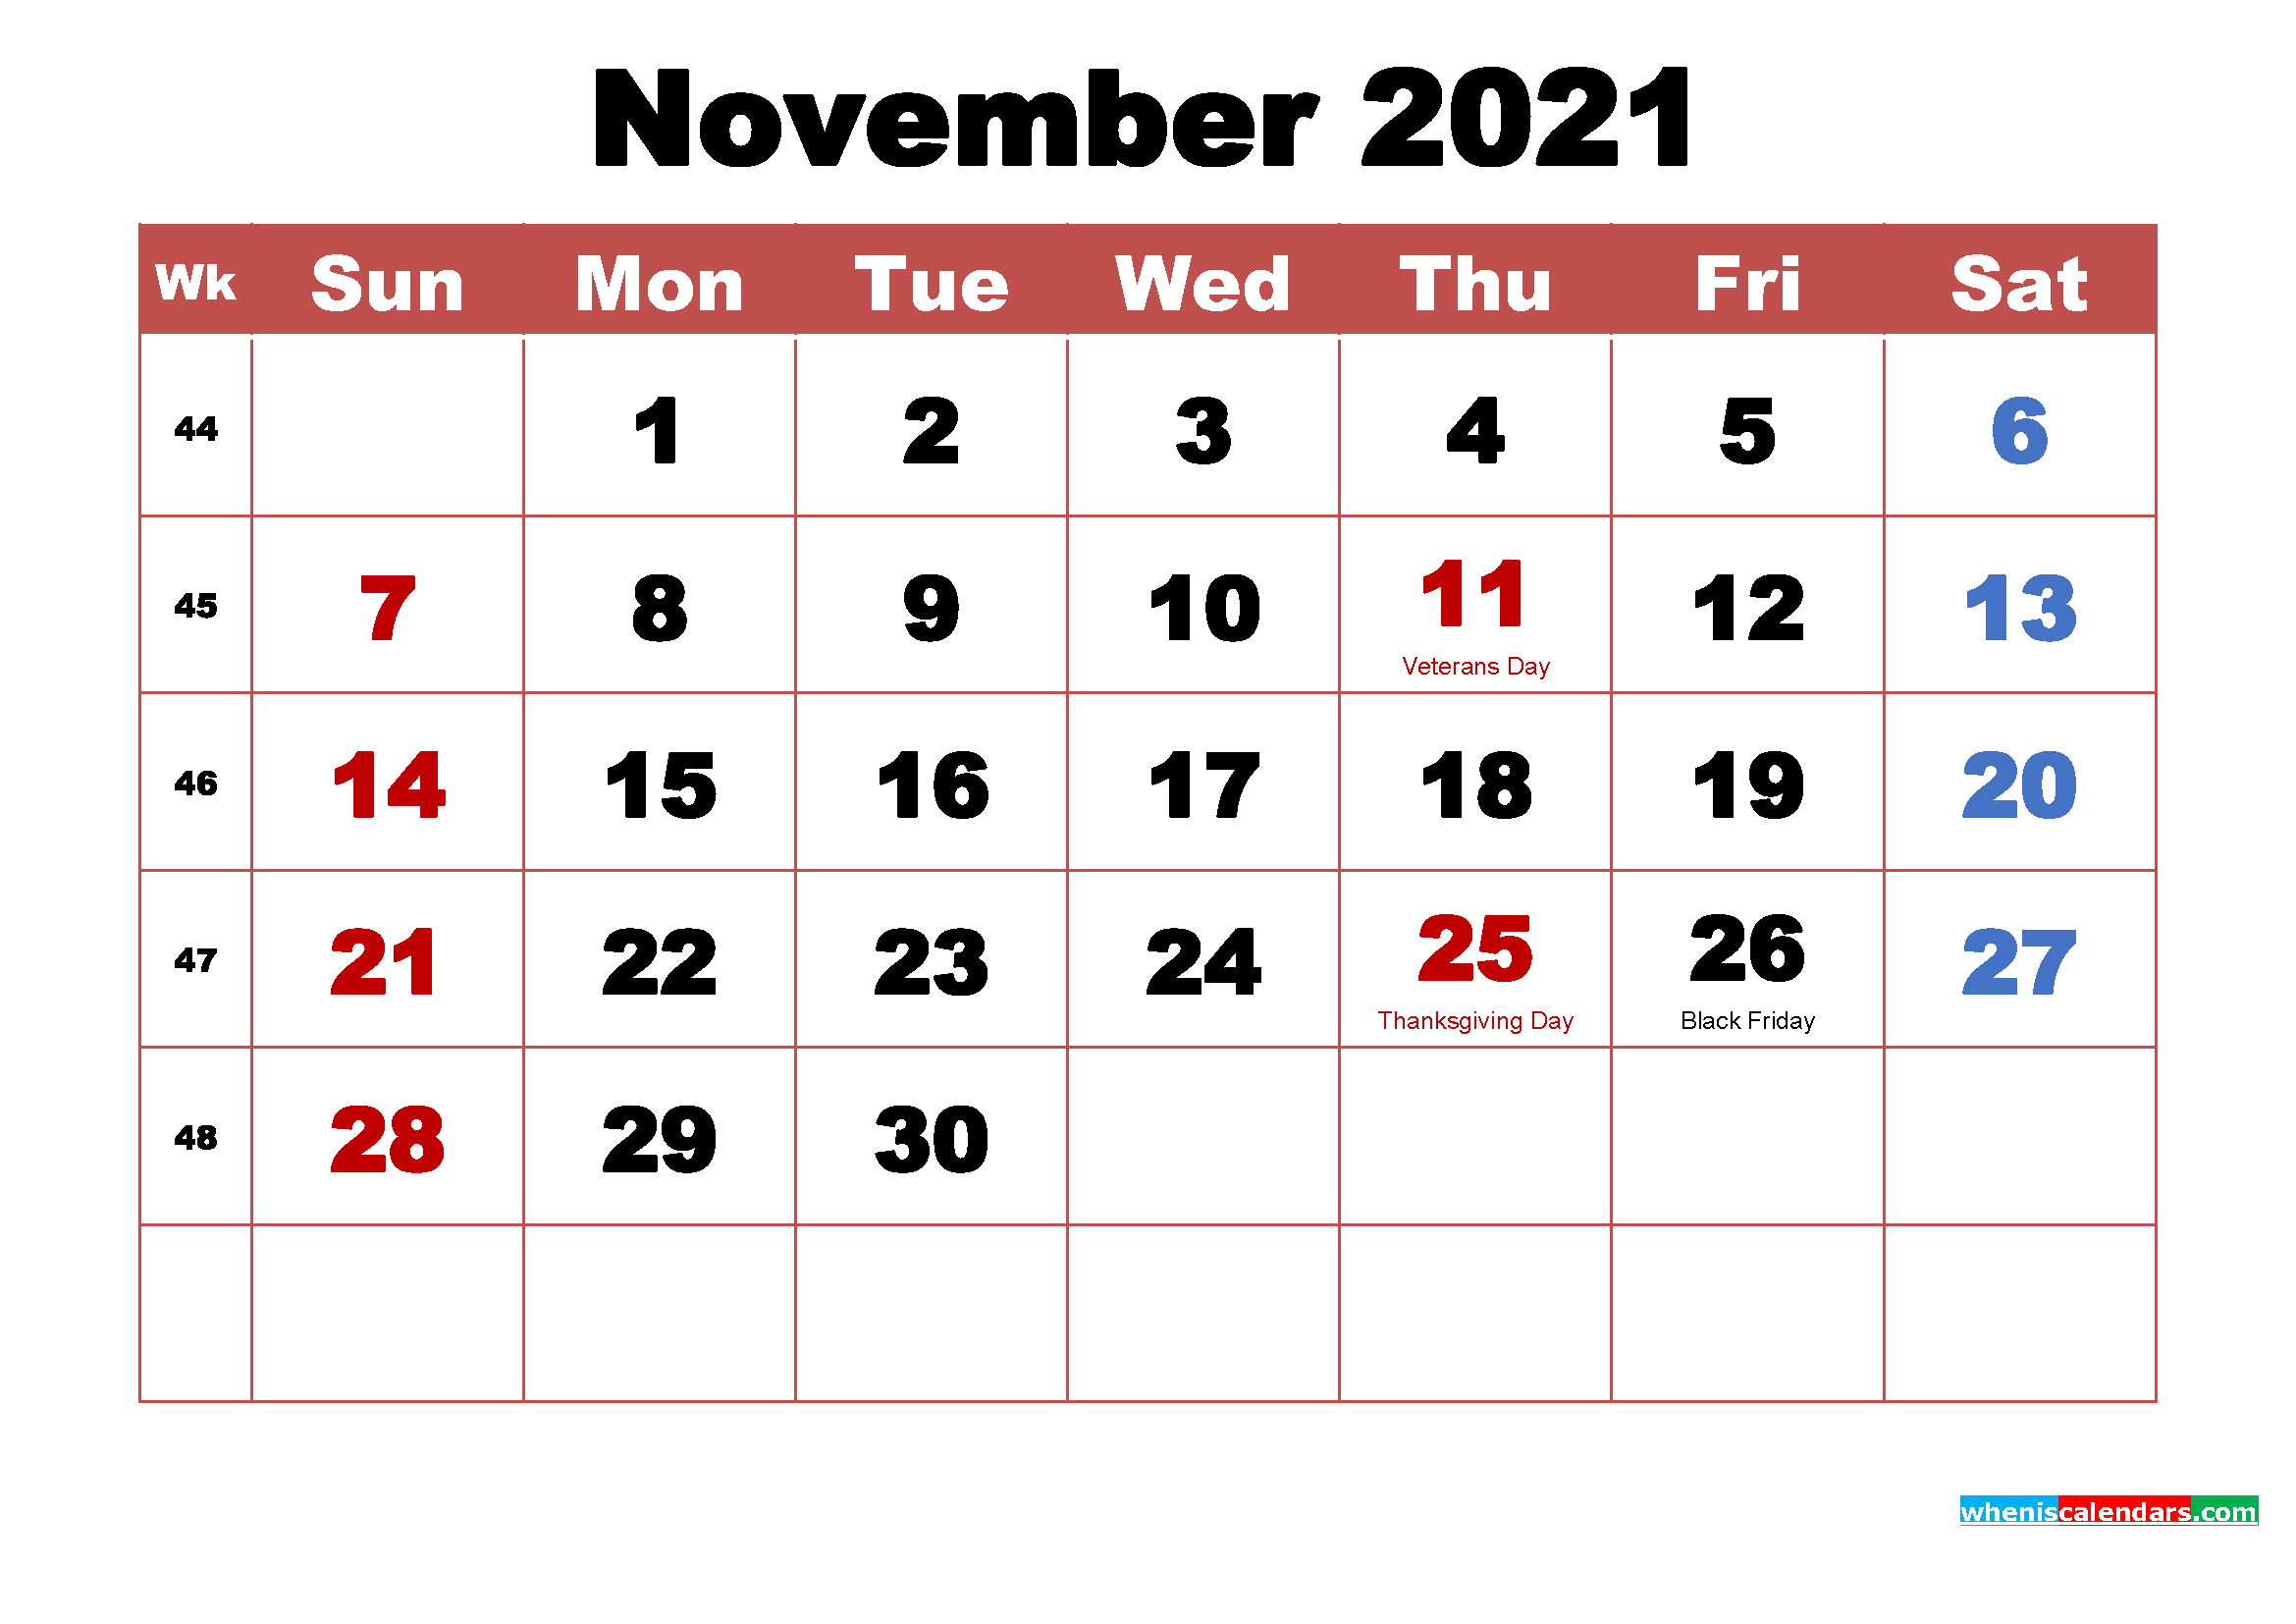 November 2021 Calendar With Holidays | 2021 Printable-List Of Festivals 2021 To Print Out